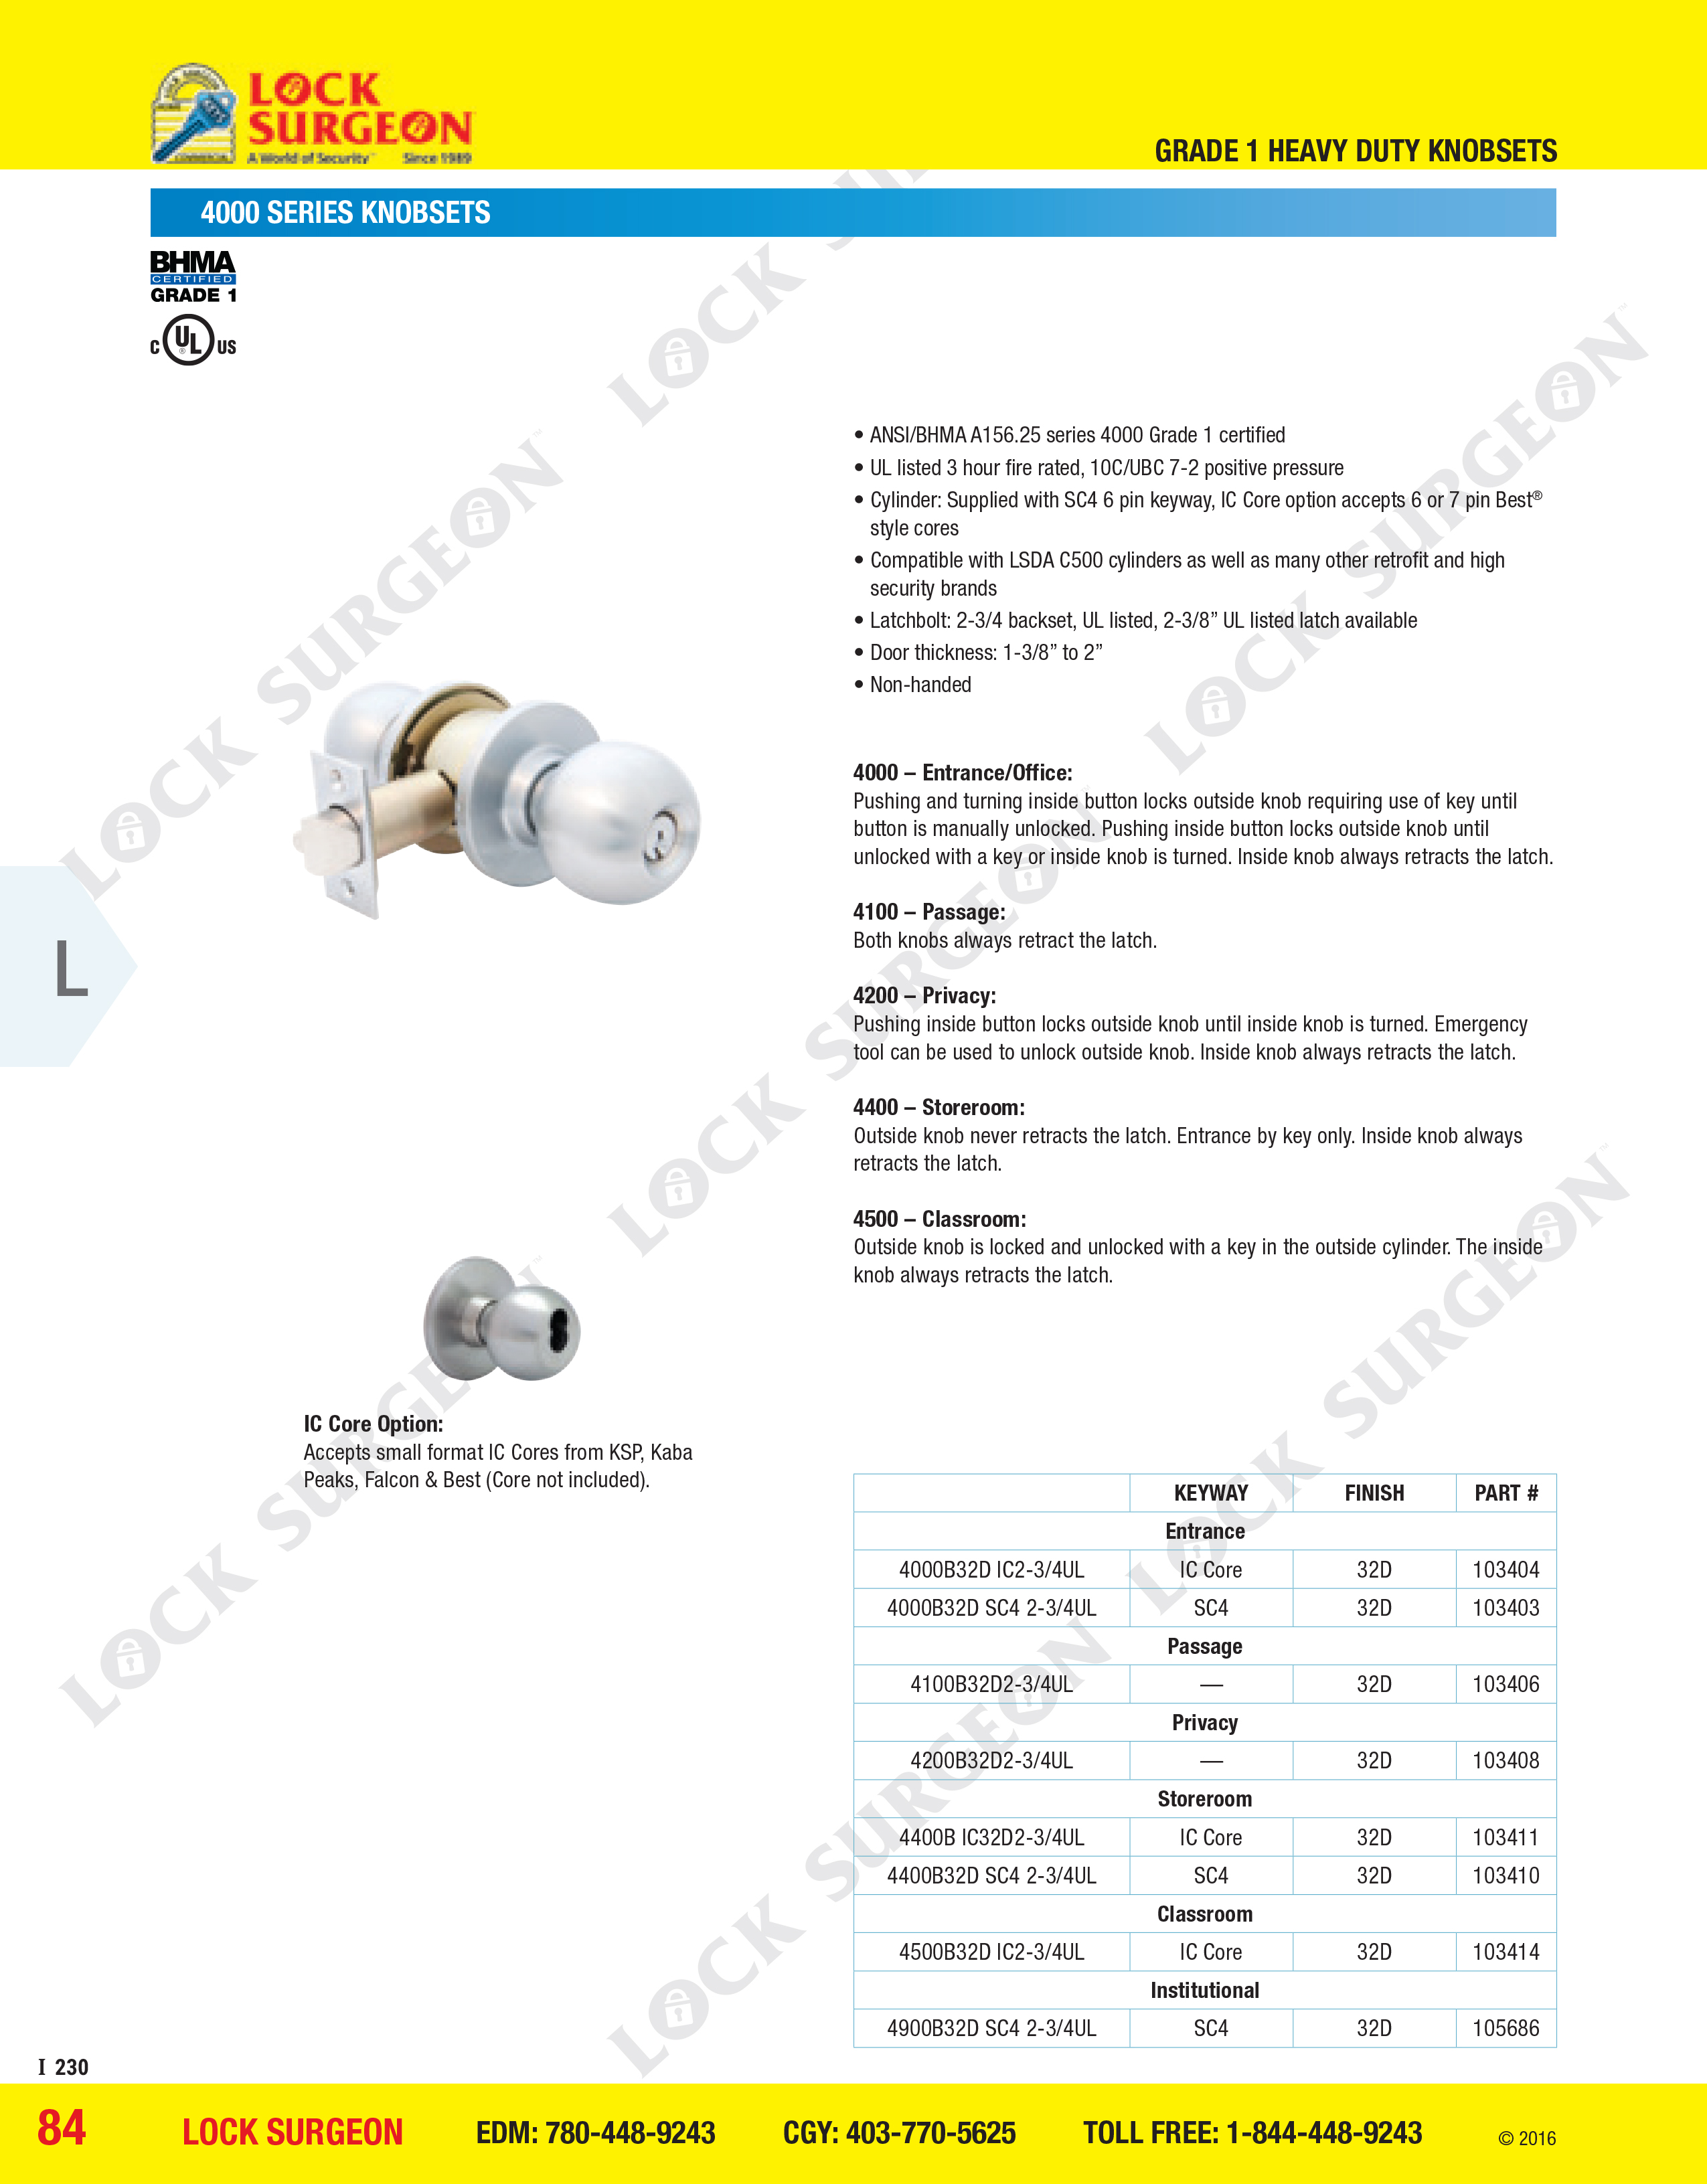 Grade 1 heavy duty commercial knob-set built to withstand high use areas, often used in schools.